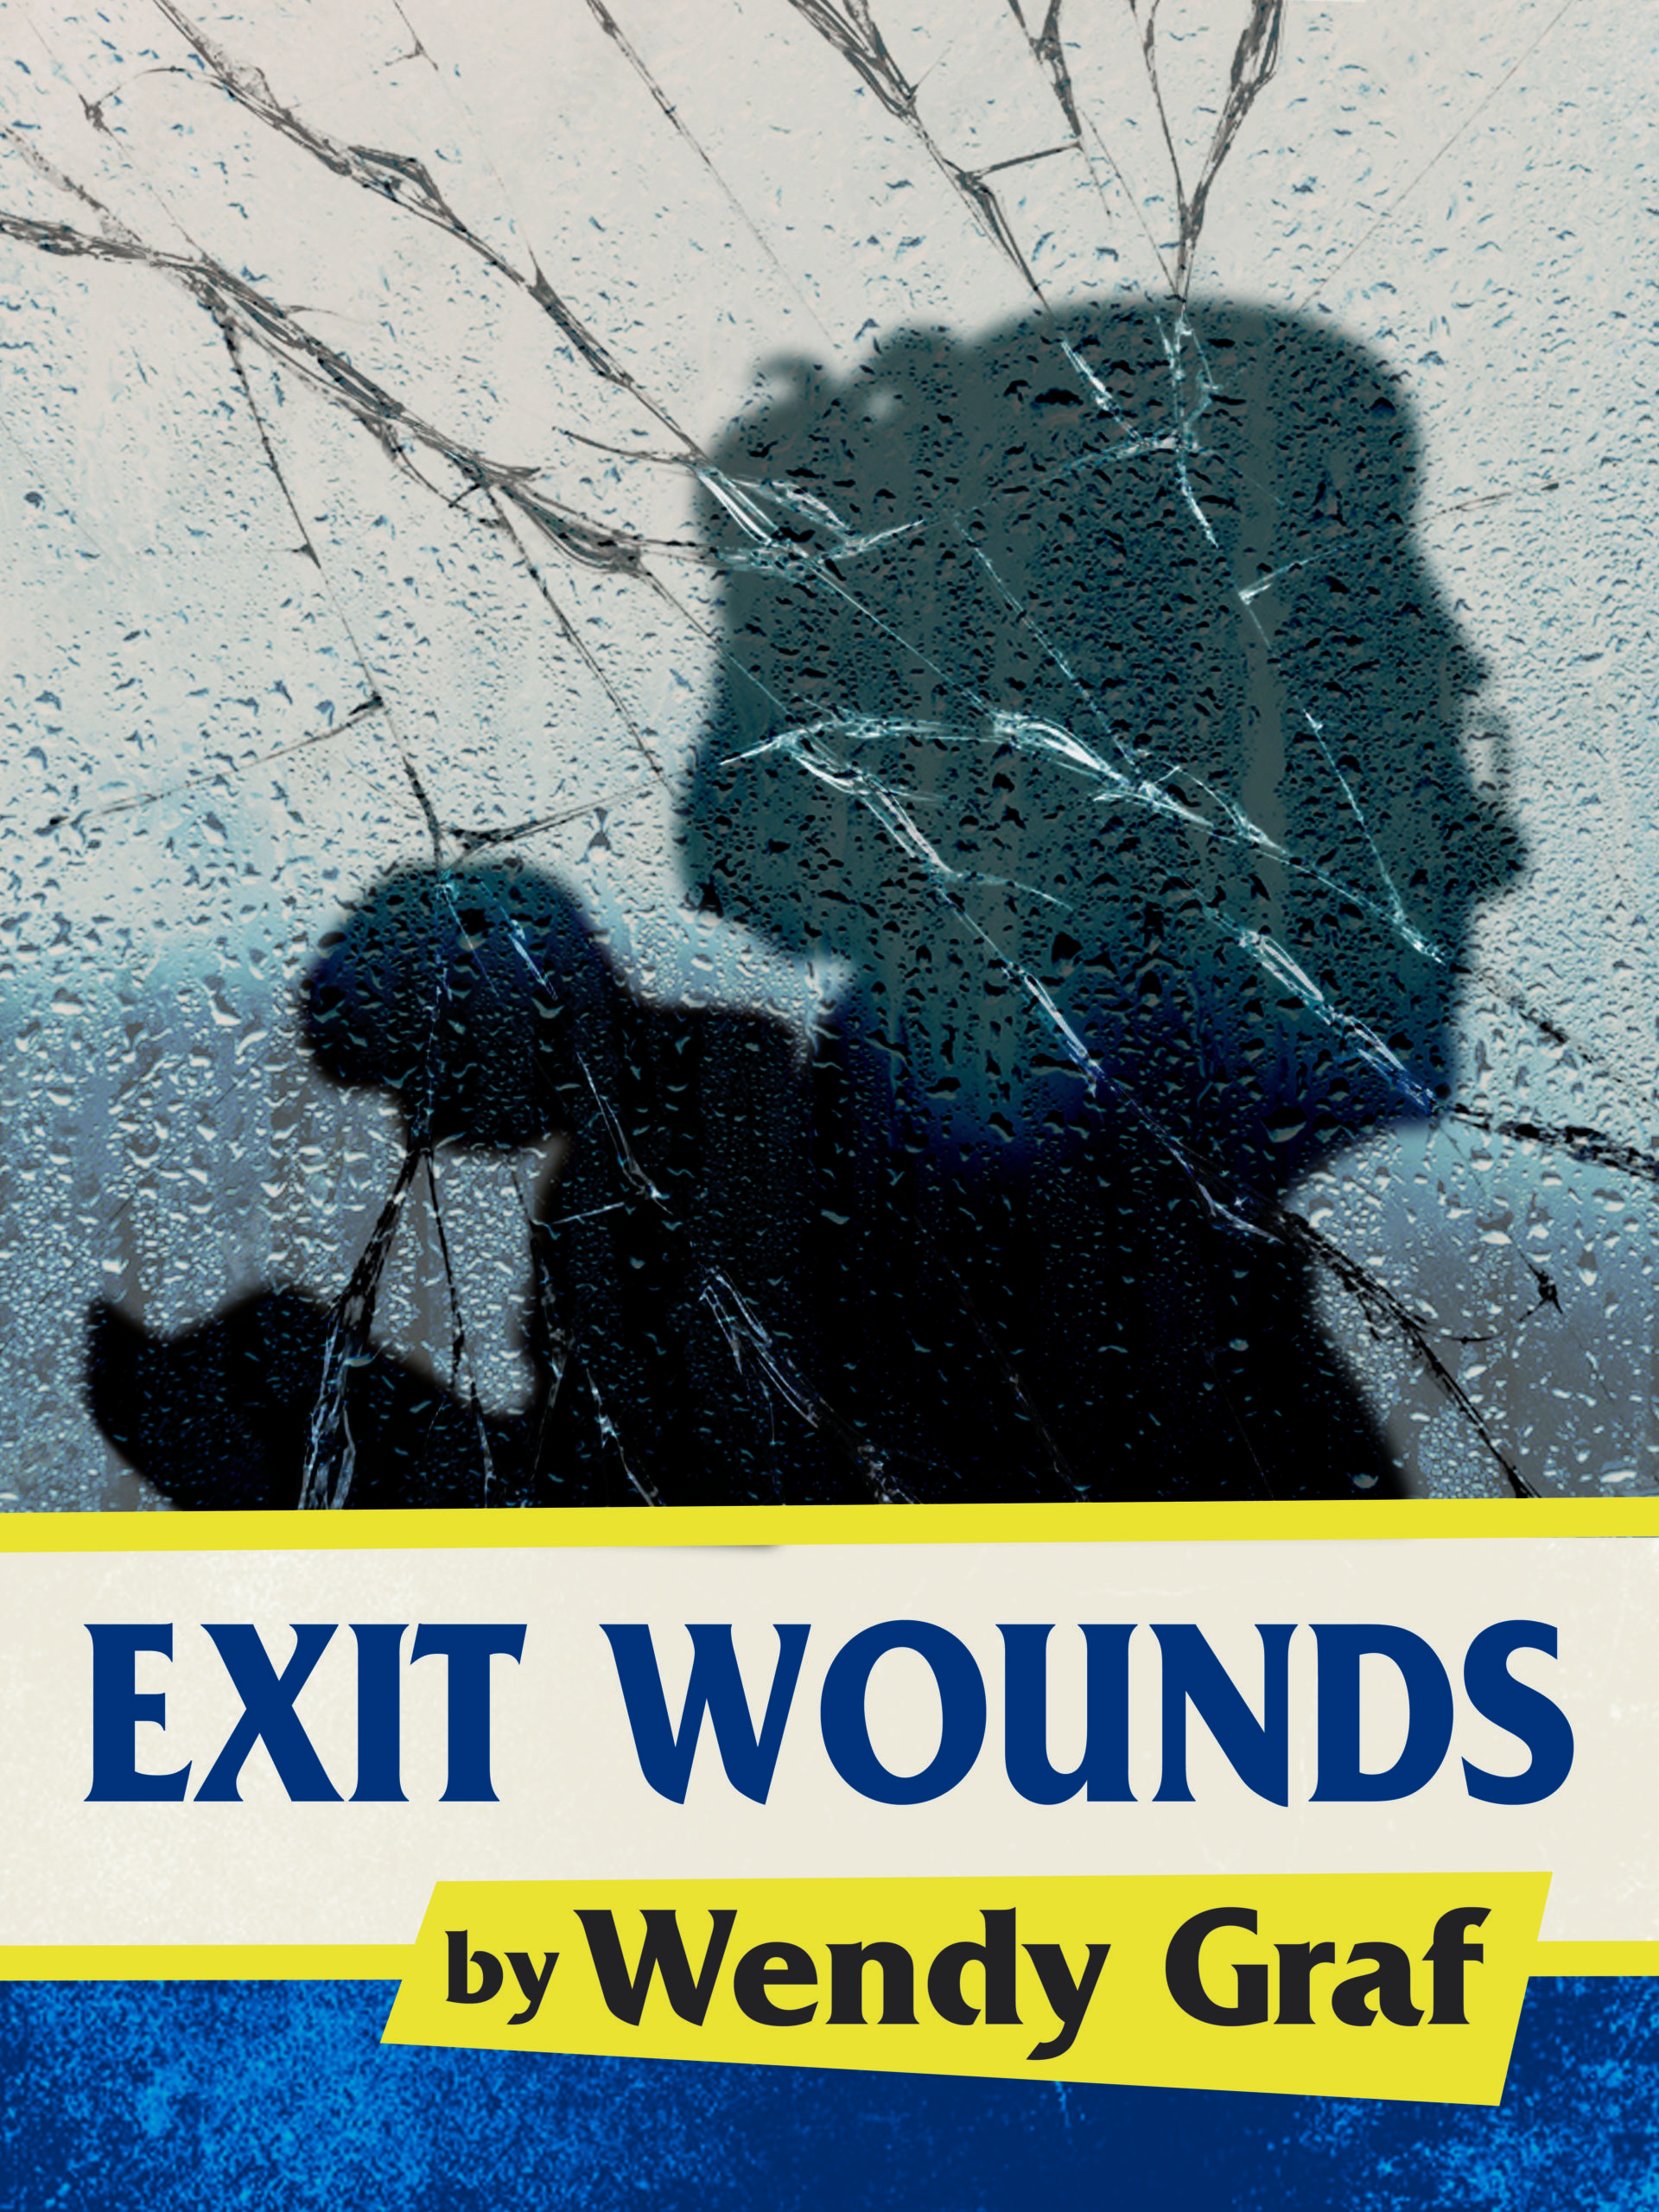 Exit Wounds by Wendy Graf at International City Theatre